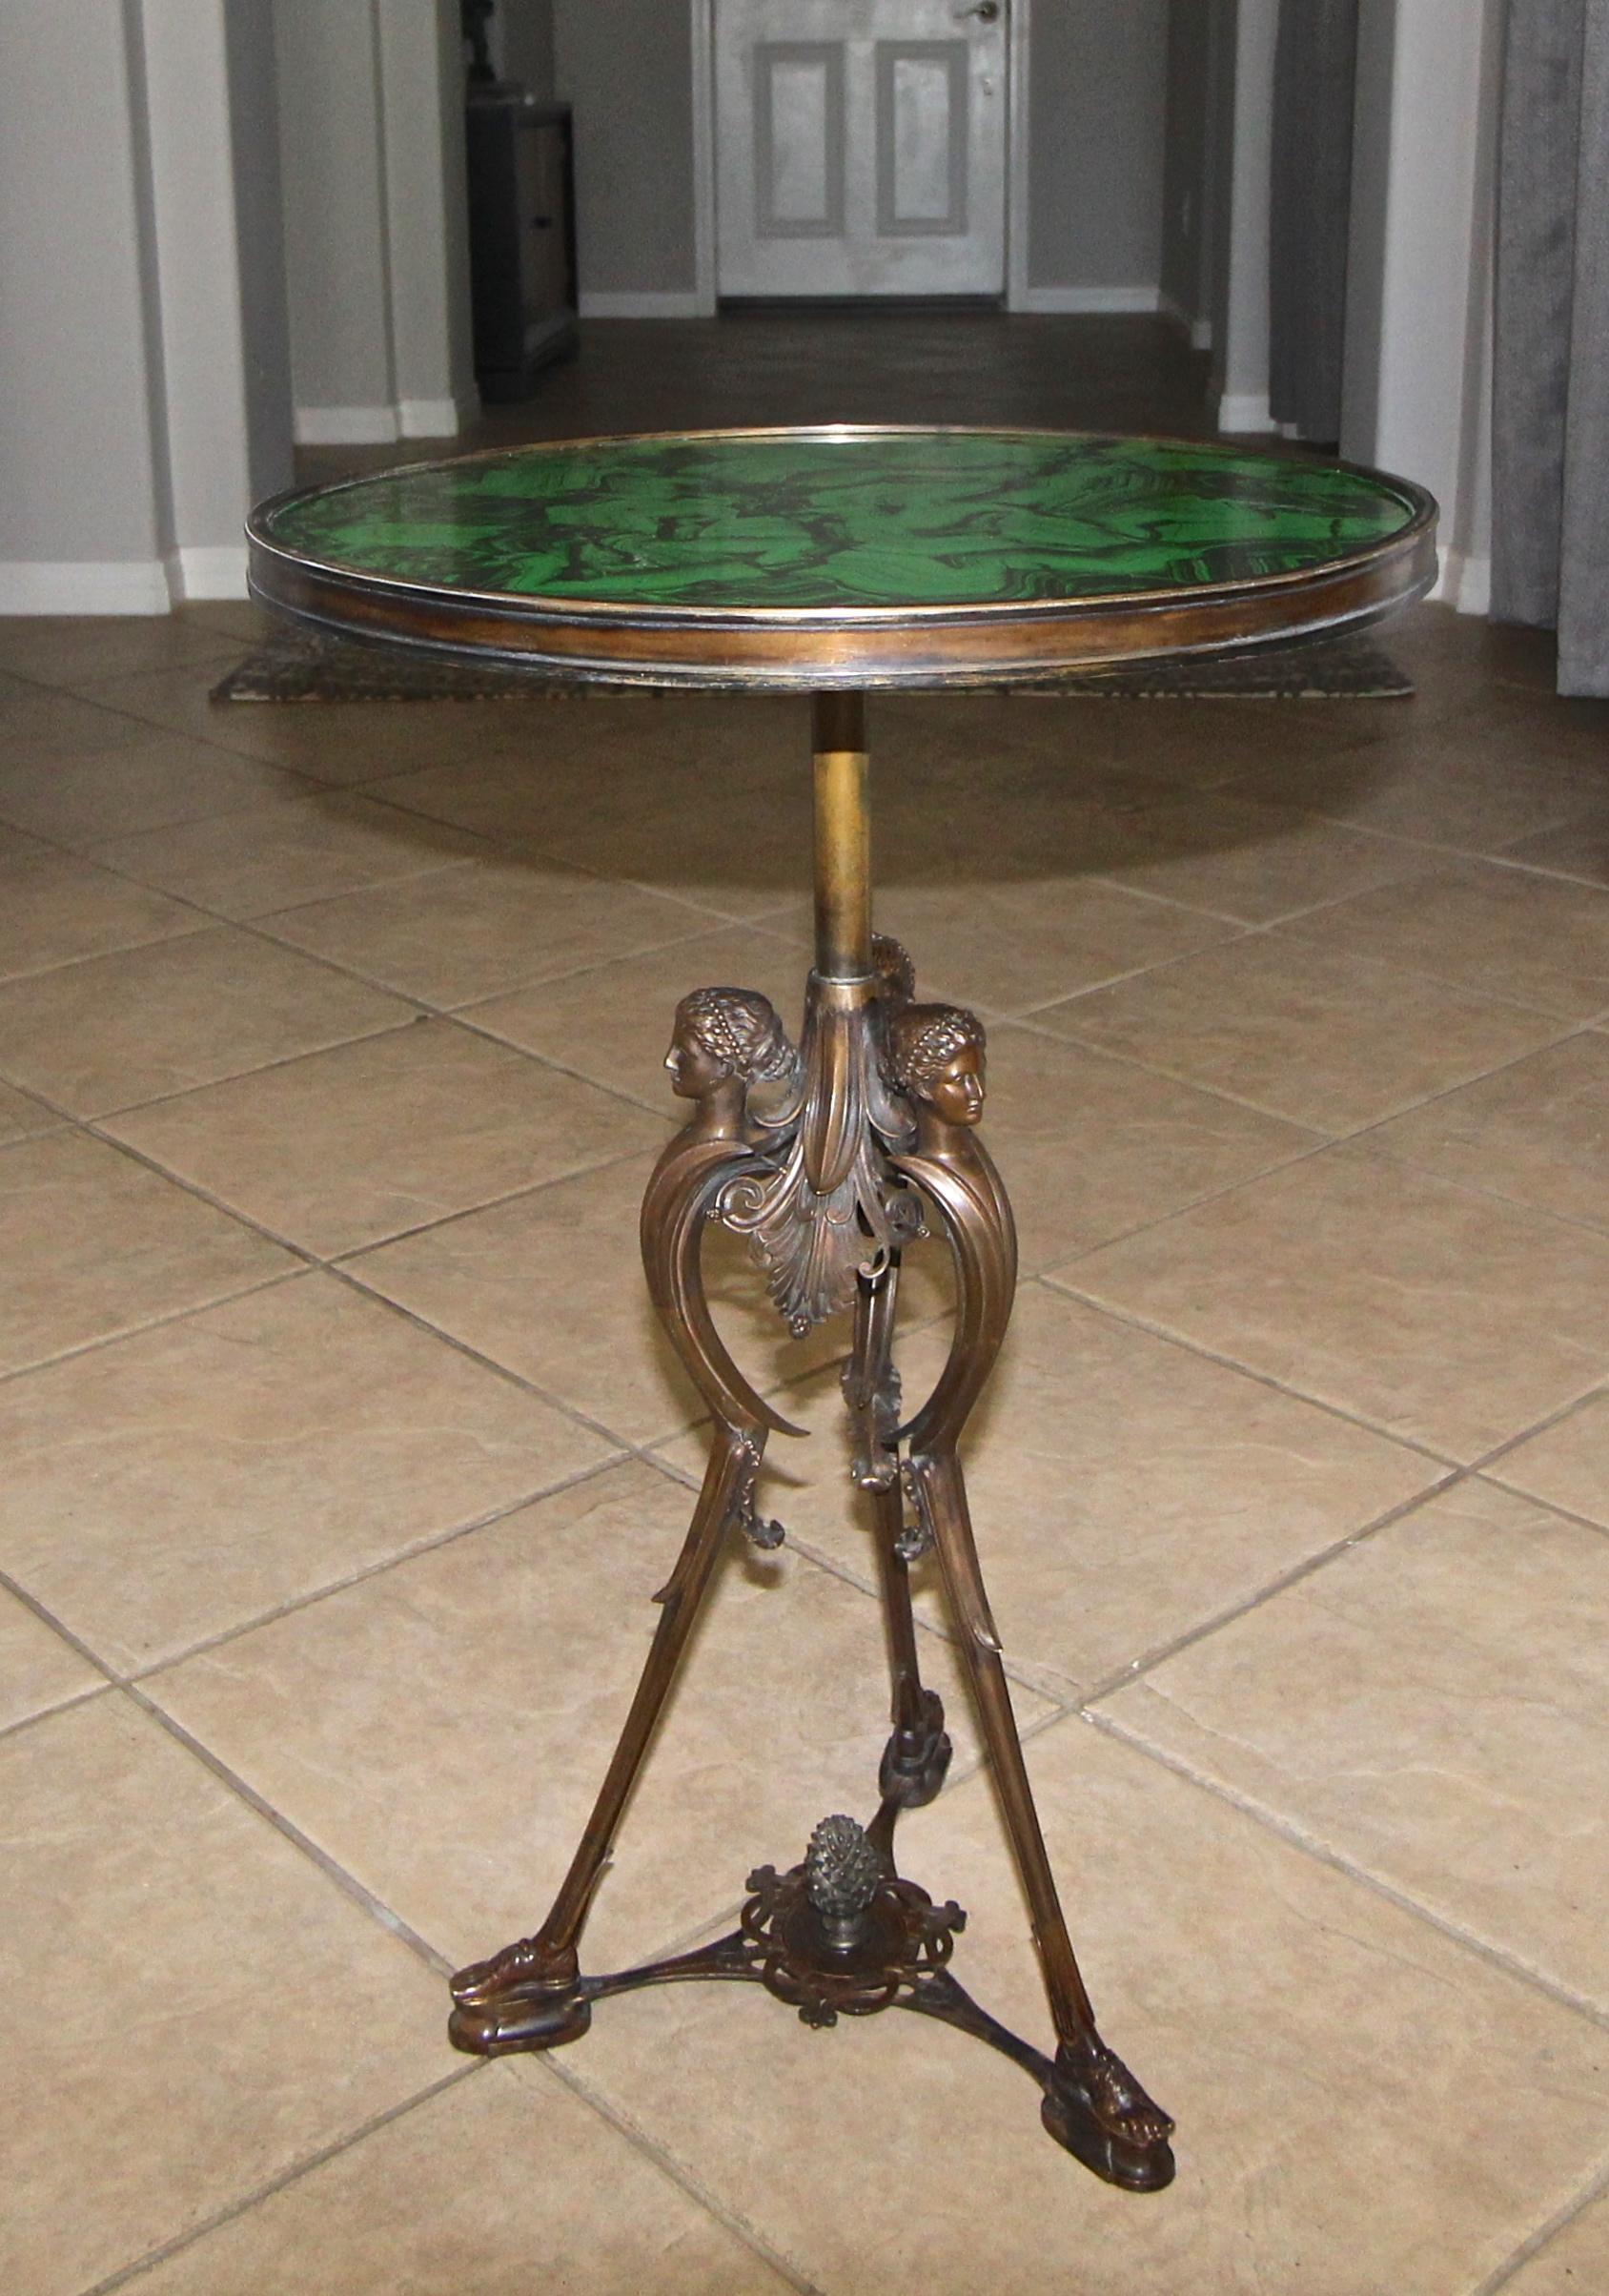 Beautiful 19th century French bronze neoclassic side or end table with later faux malachite top, bronze has exceptional detailing and great overall patina.
 